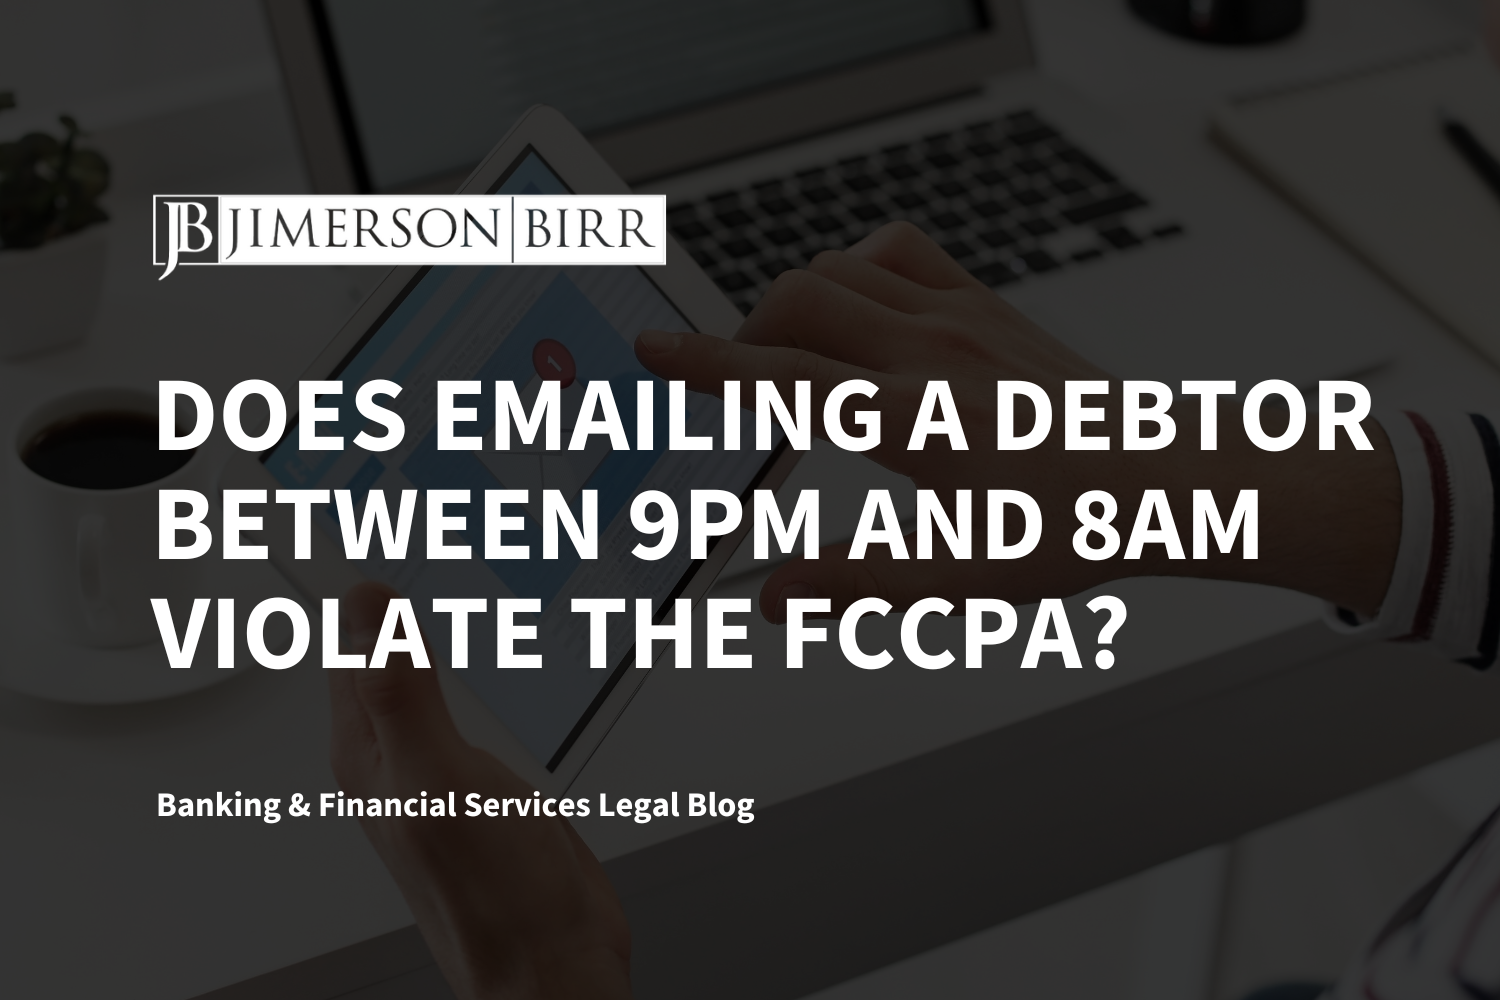 Does Emailing a Debtor Between 9pm and 8am Violate the FCCPA?